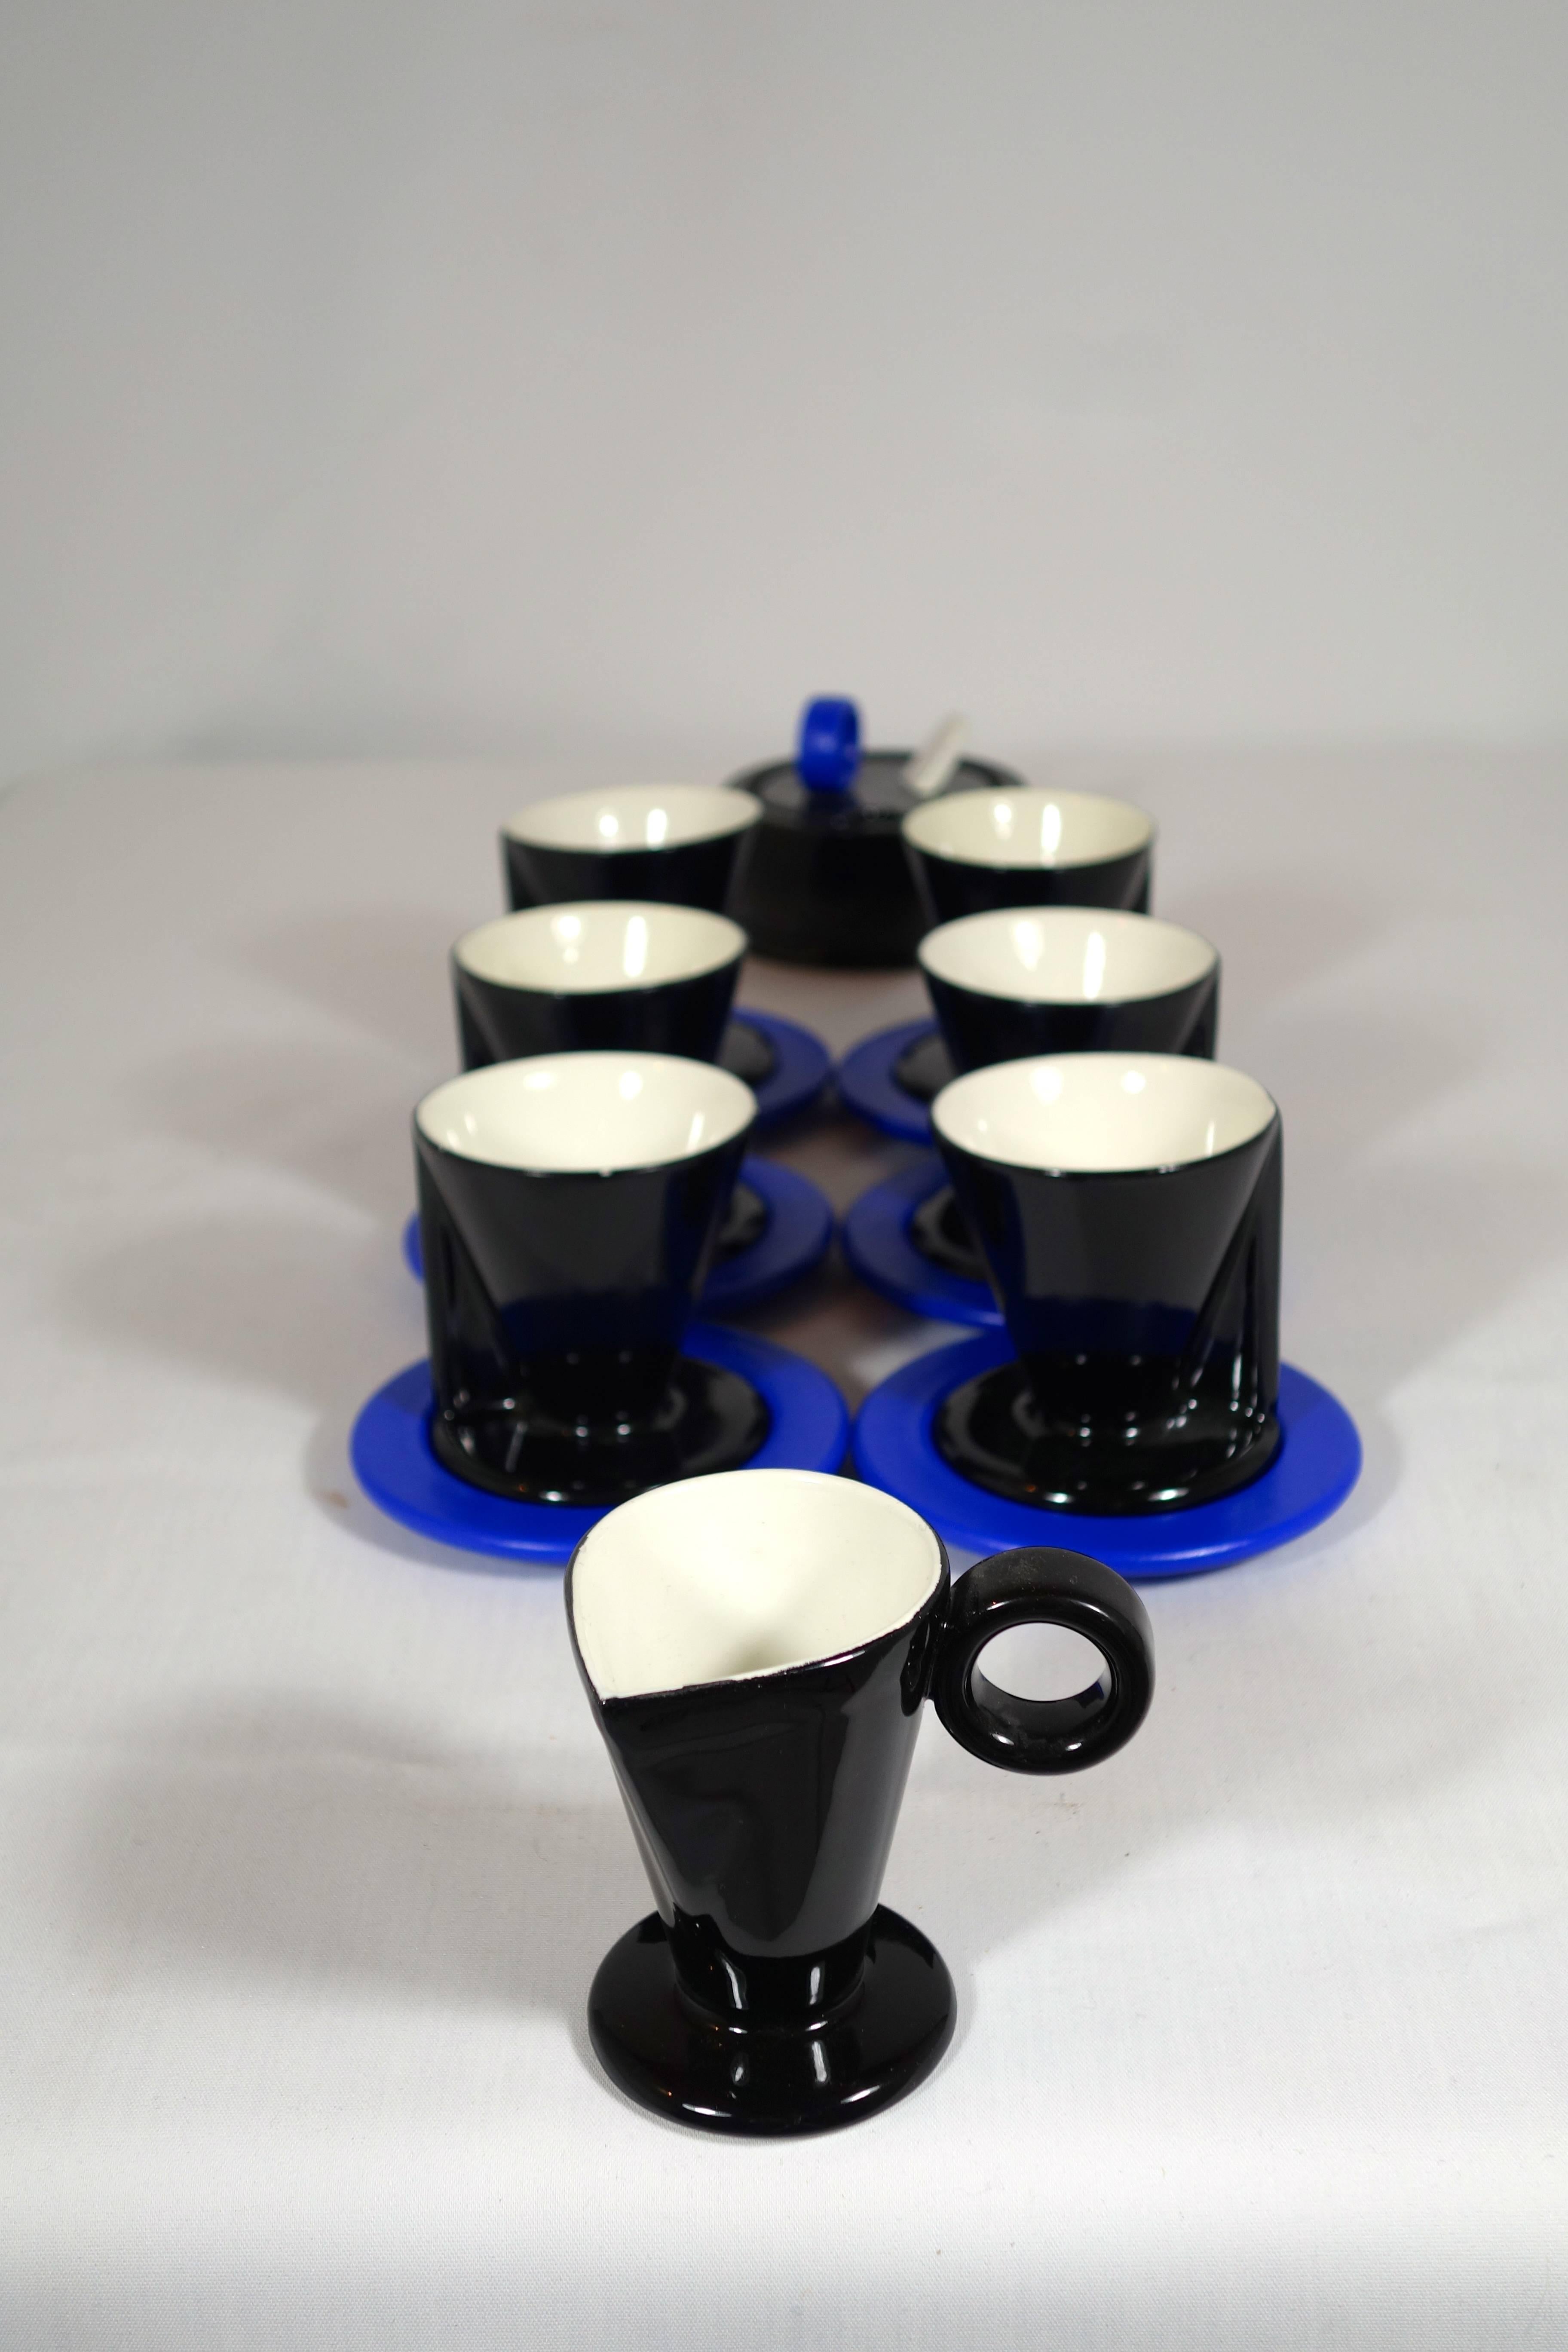 Post-Modern Memphis Coffee Set from the Hollywood Collection by Marco Zanini for Flavia